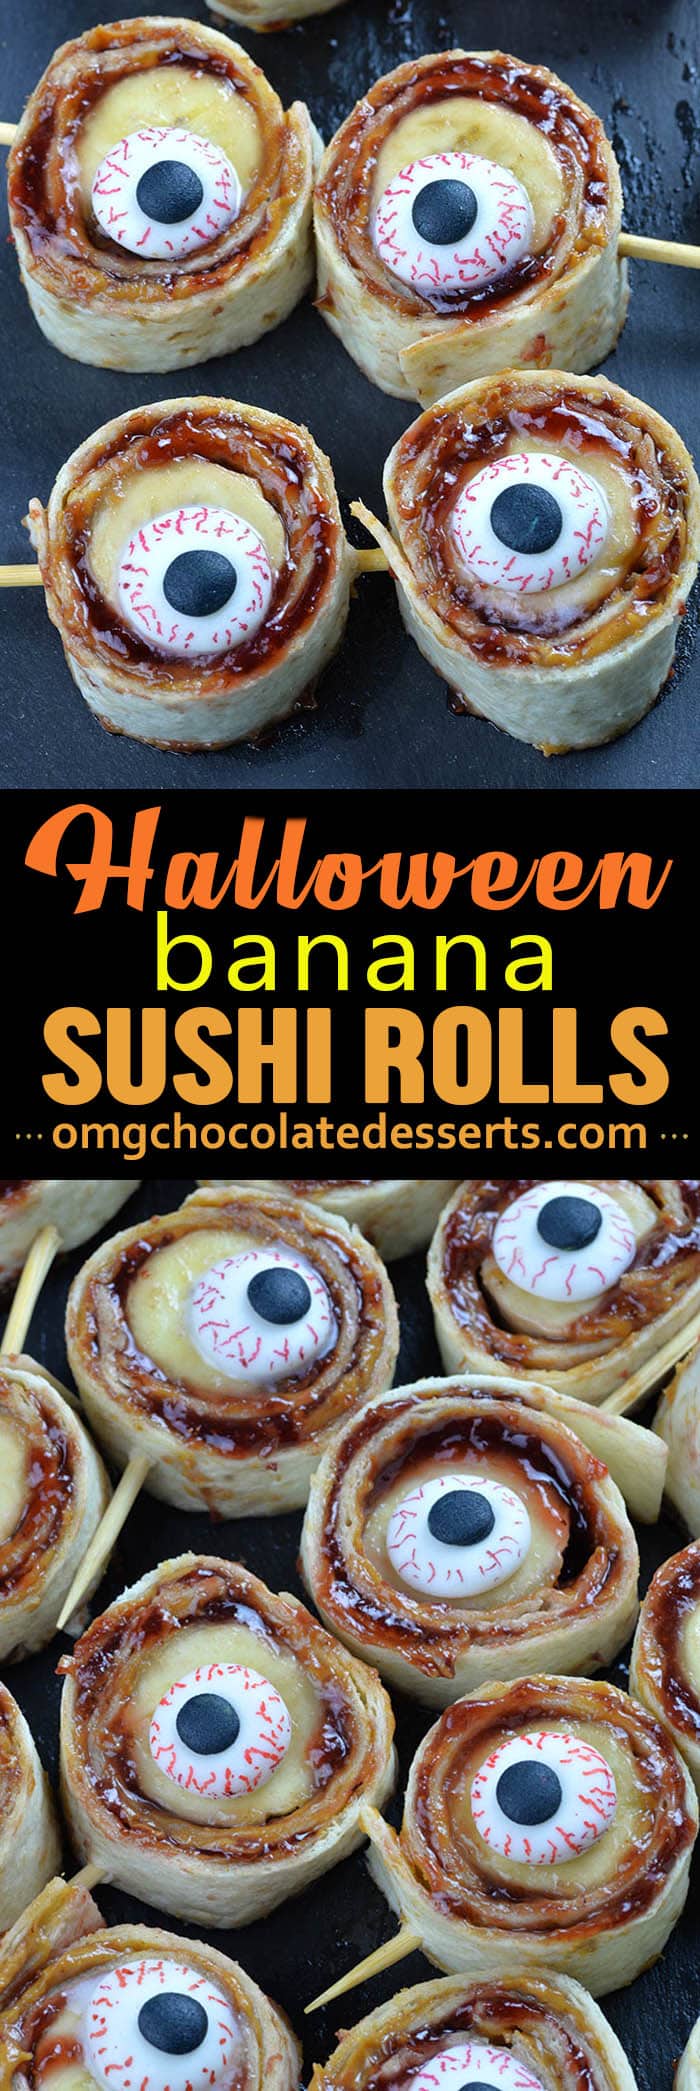 Halloween Banana Sushi Rolls - these delicious rolls are filled with banana, peanut butter and jelly, rolled in tortillas, cut into bite sized portions and garnished with candy eyes.